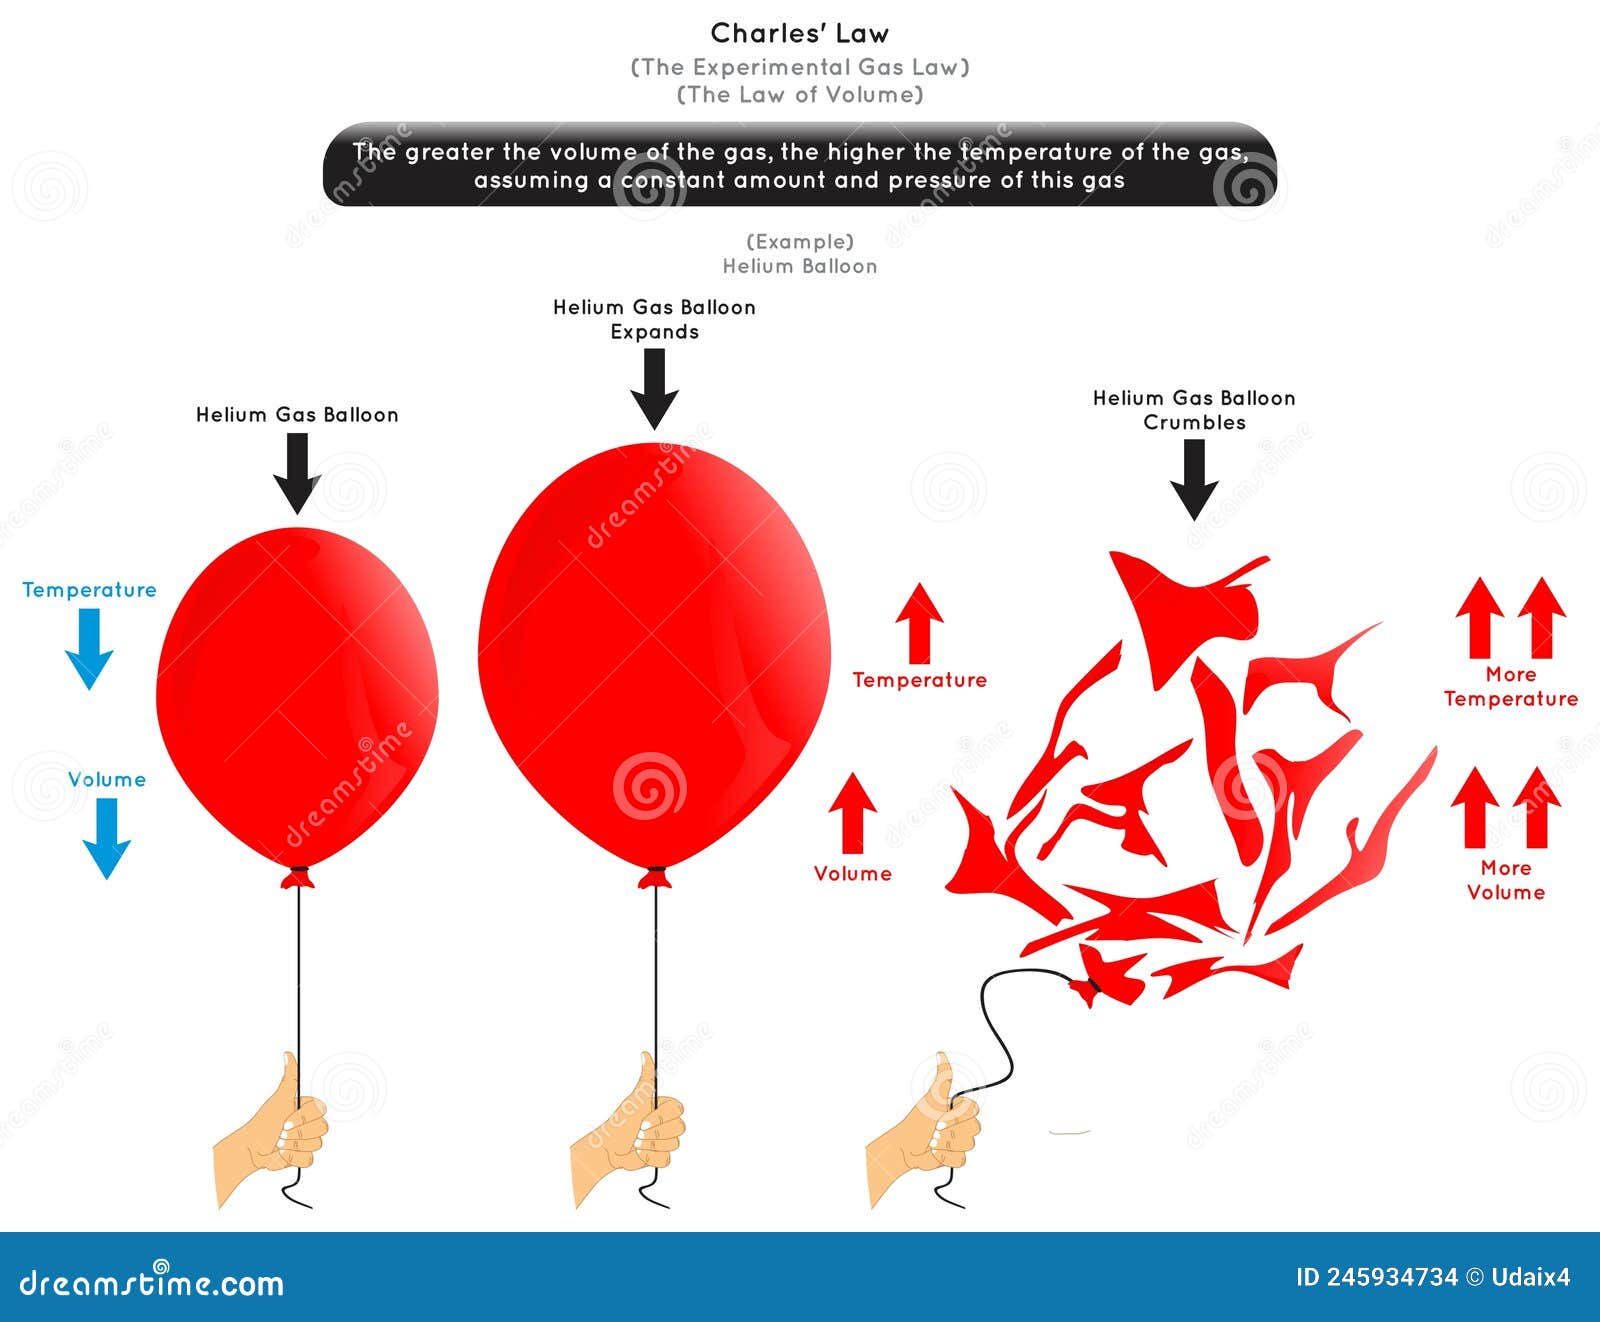 charles law infographic diagram with example of helium balloon